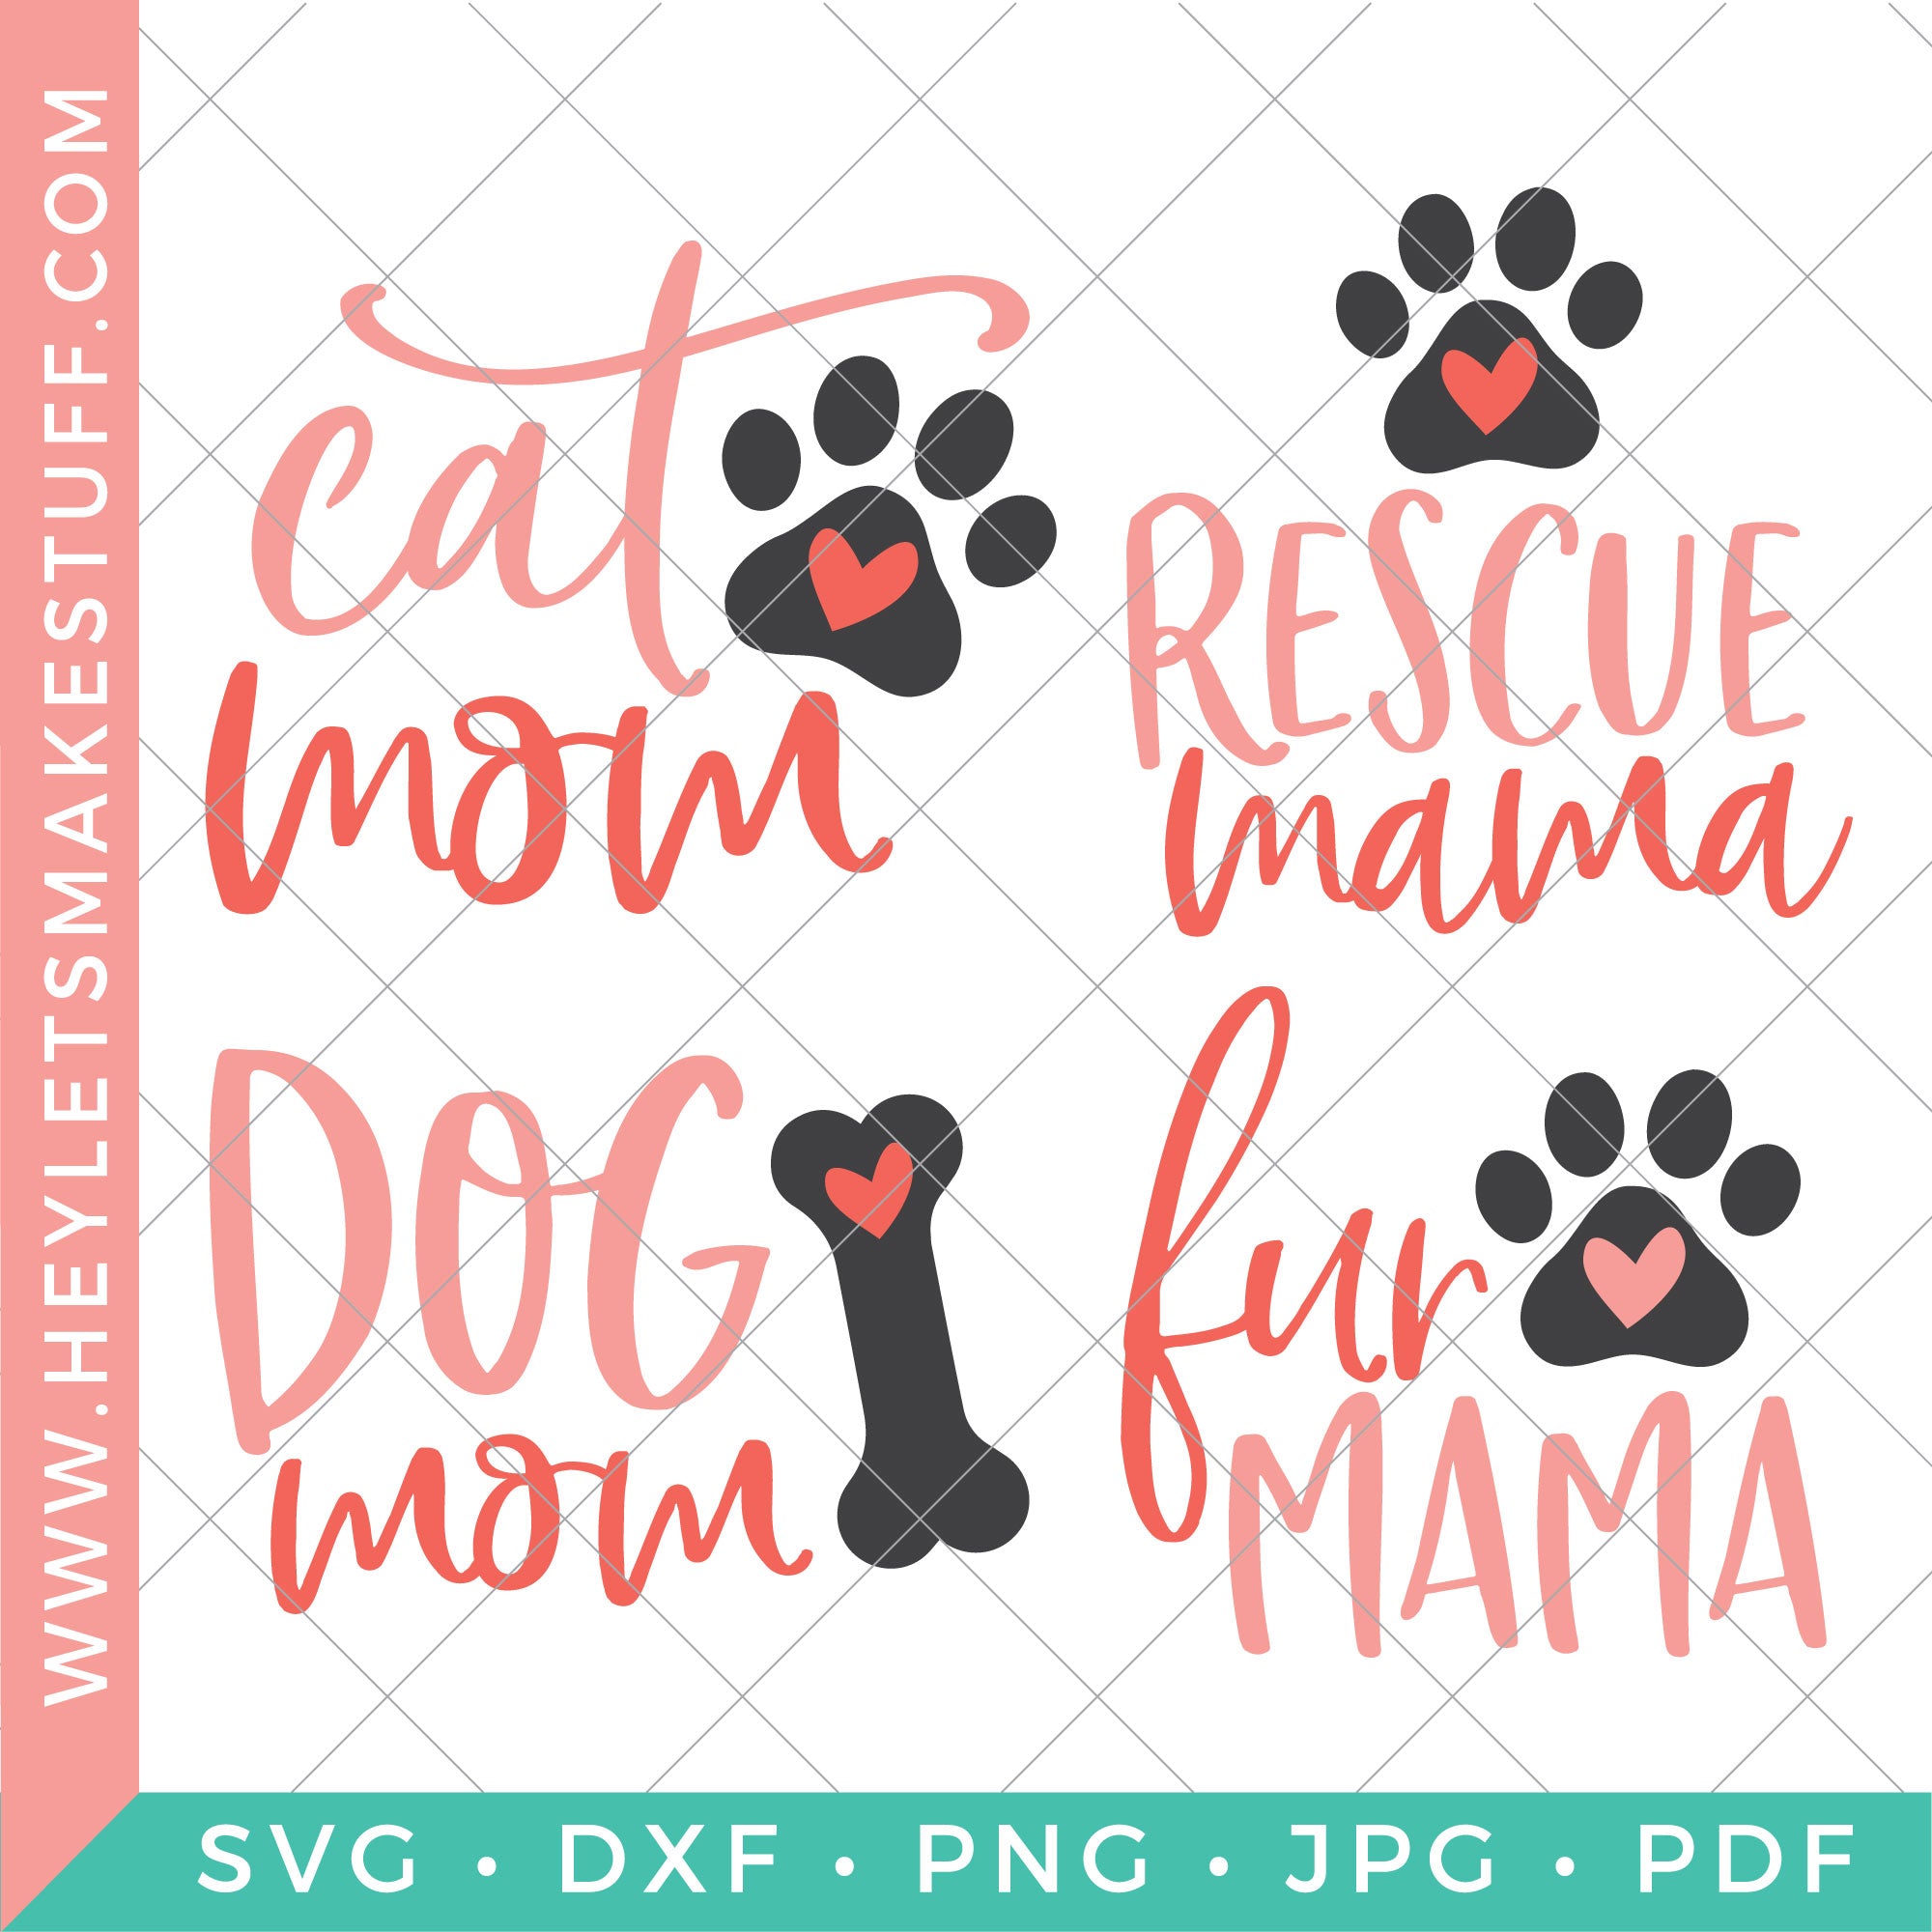 Download Dog Mom Svg Cut File Dog Mama Cutting File Fur Mom Pet Mom Dog Lovers Cuttables Funny Dogs Silhouette Cricut Die Cuts Vinyl T Shirt Clip Art Art Collectibles Vadel Com